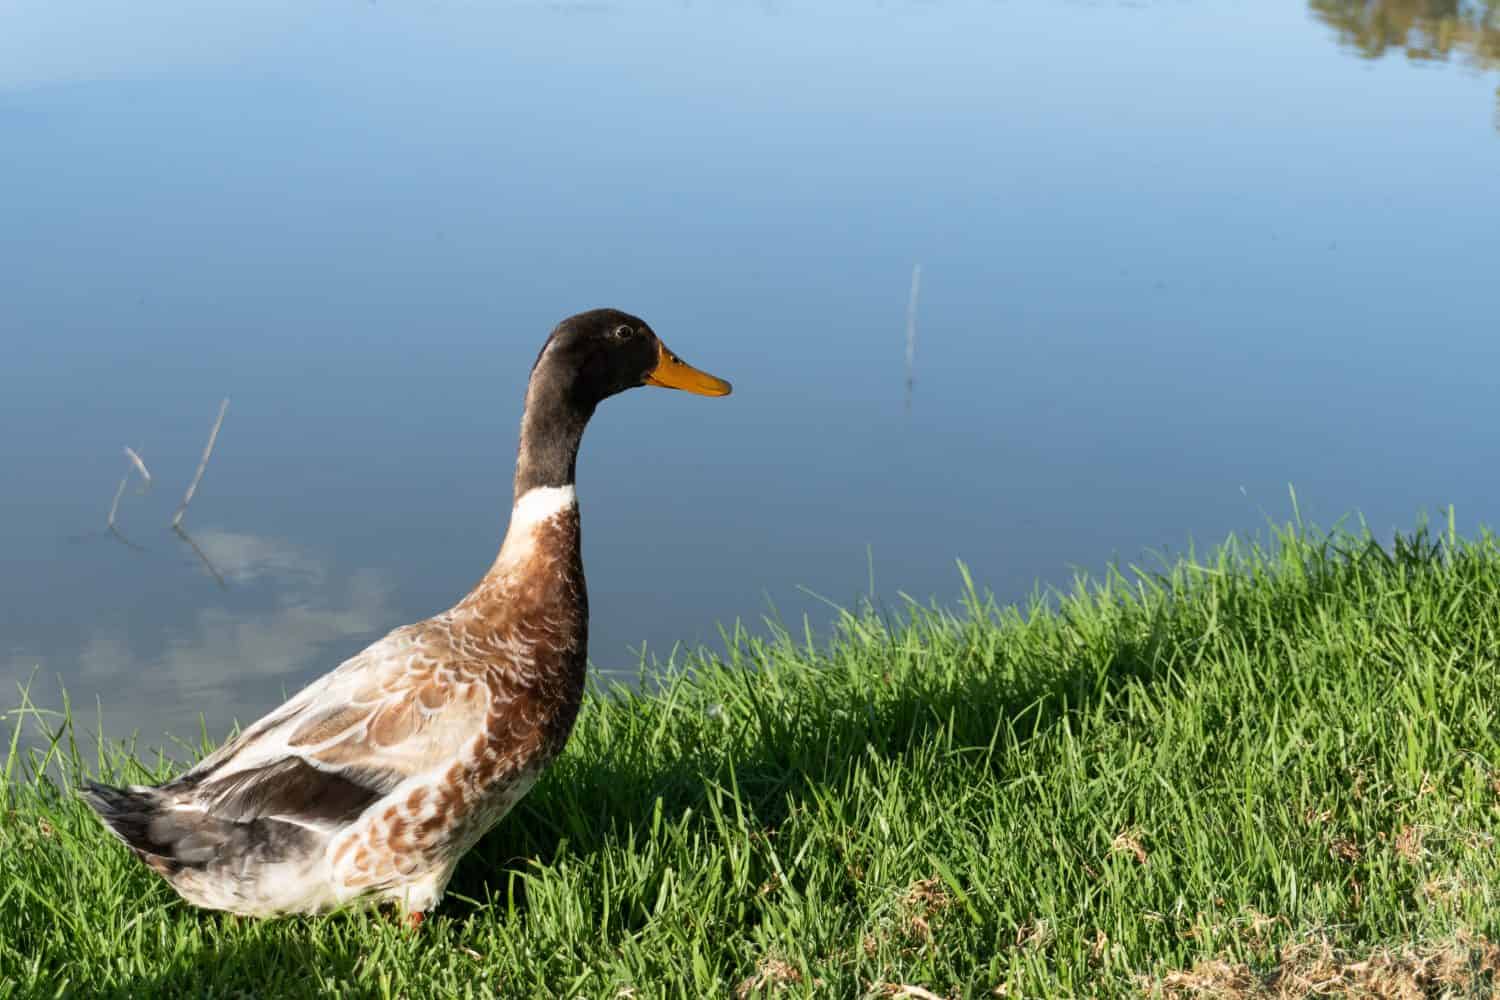 Abacot Ranger duck on the grass bed shore of a lake